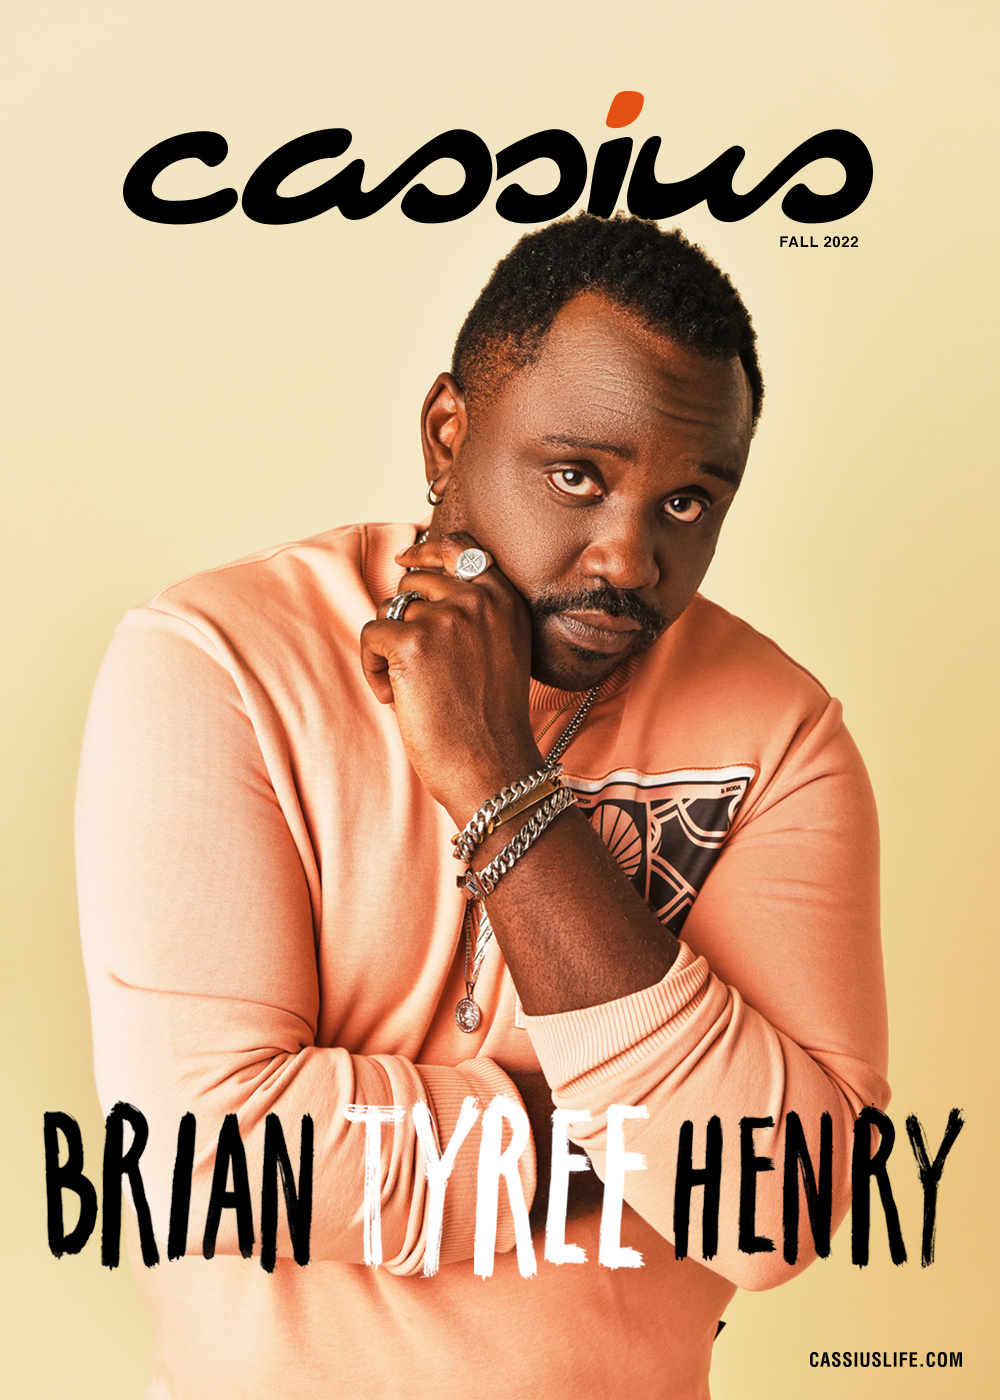 Actor Brian Tyree Henry